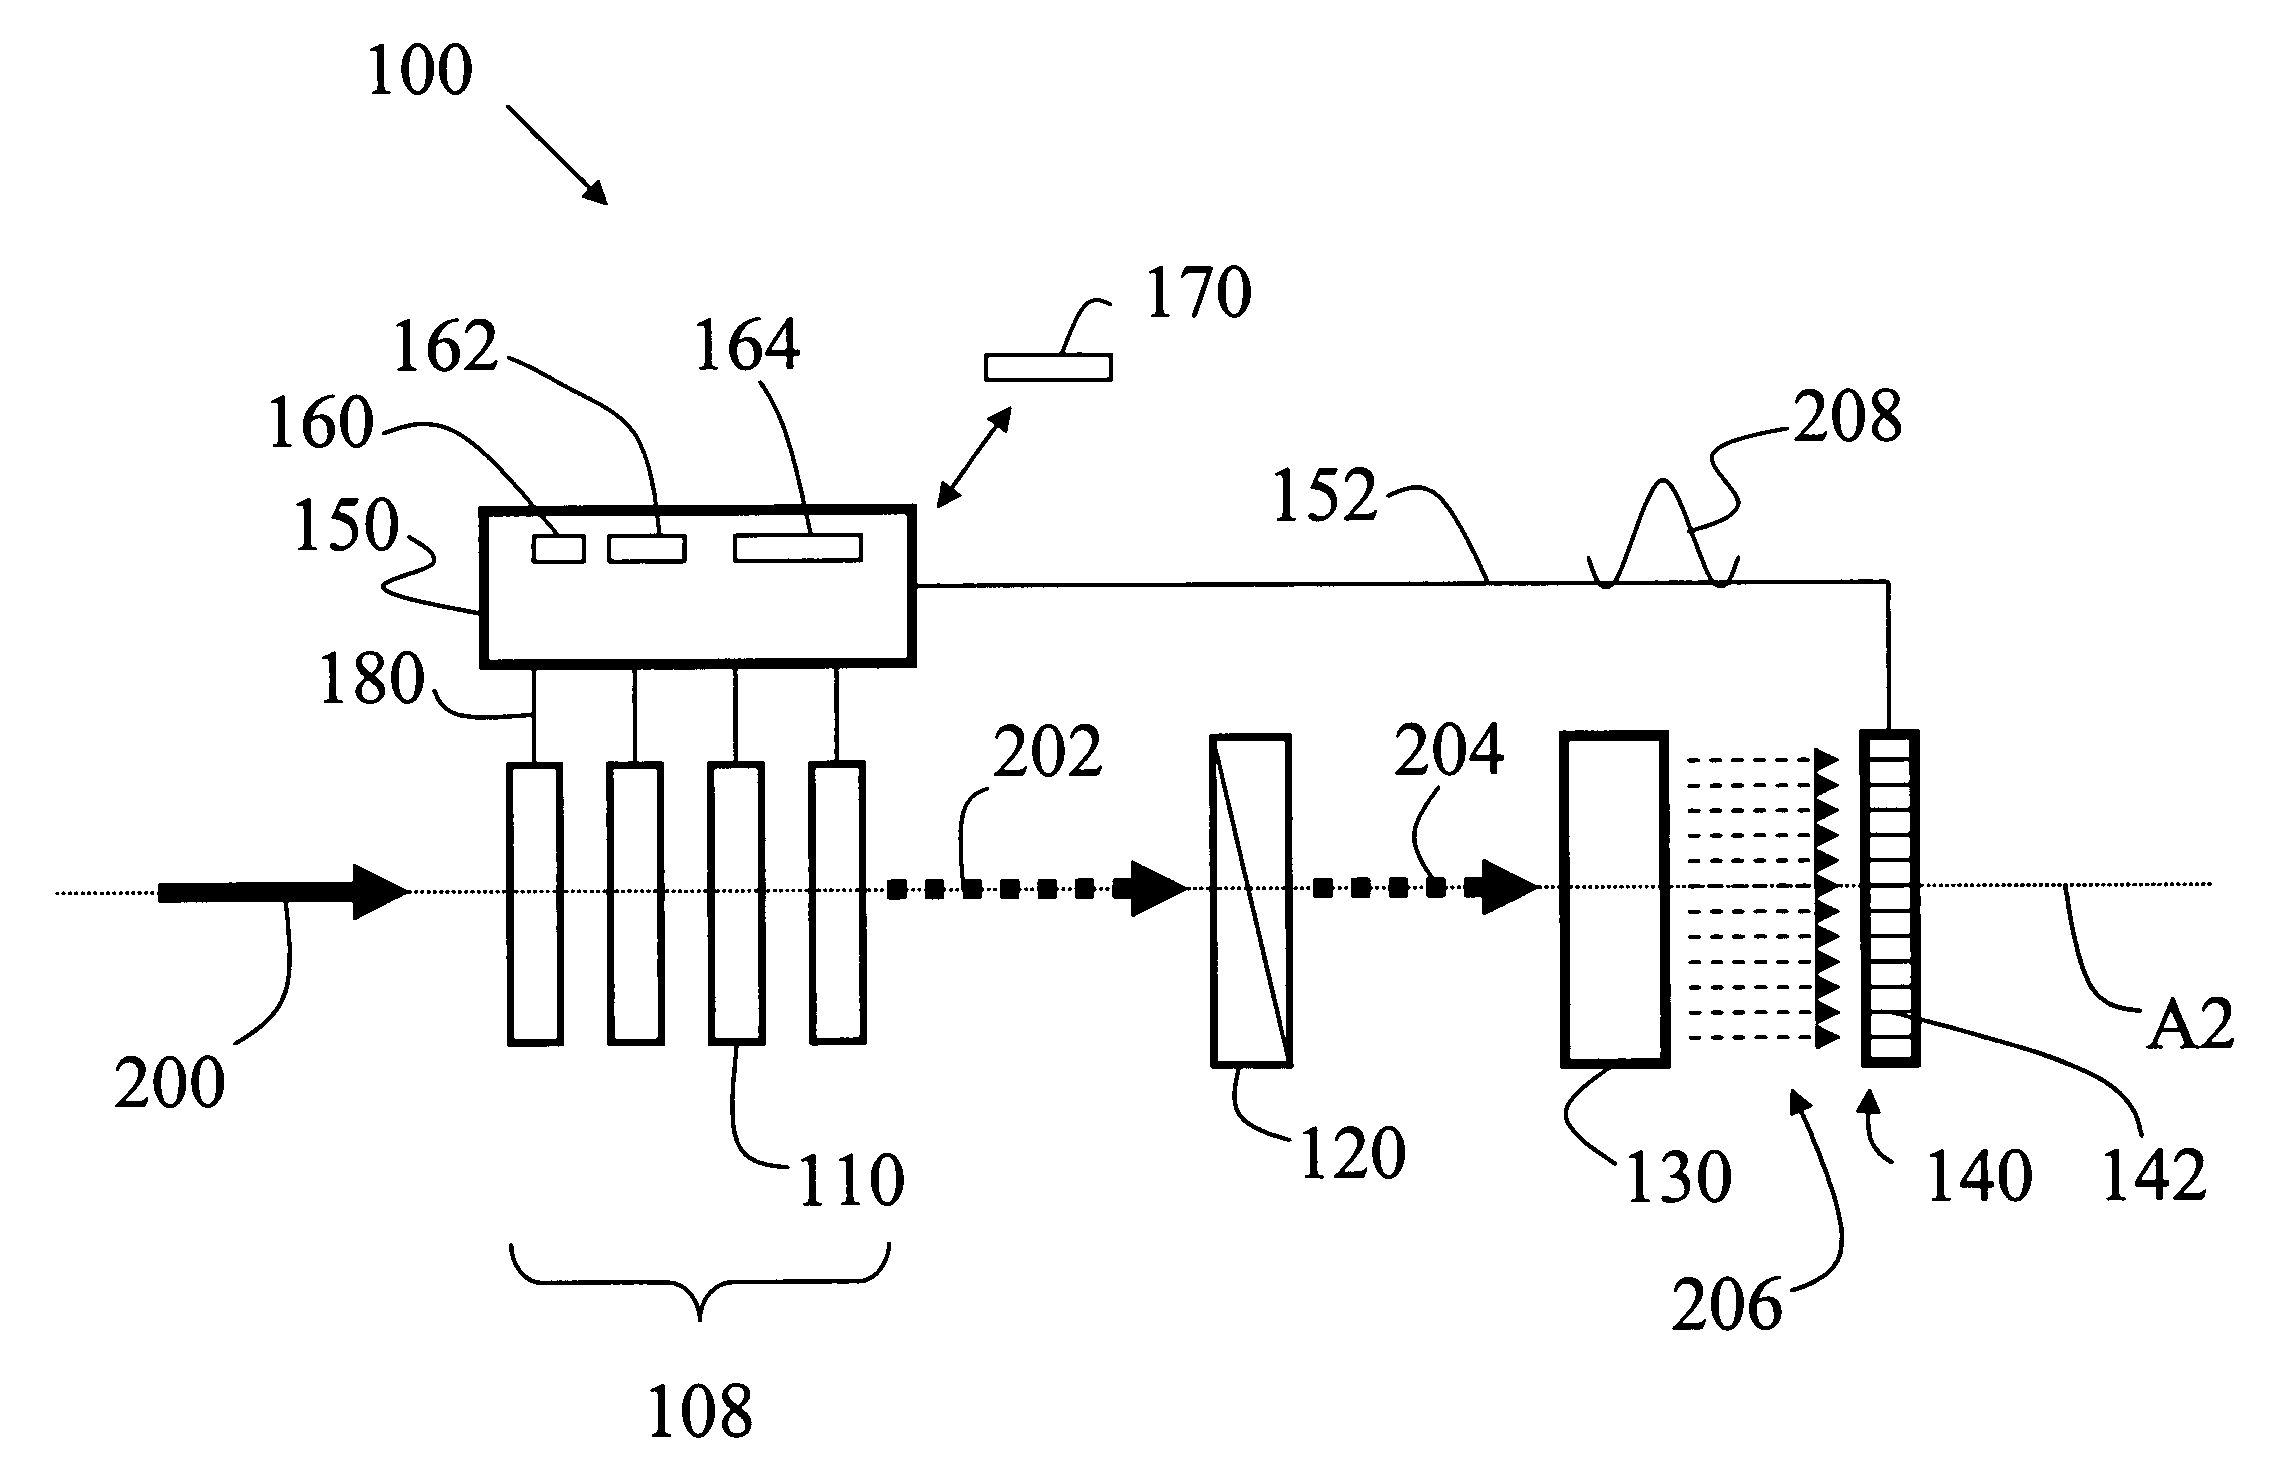 Wavelength-parallel polarization measurement systems and methods